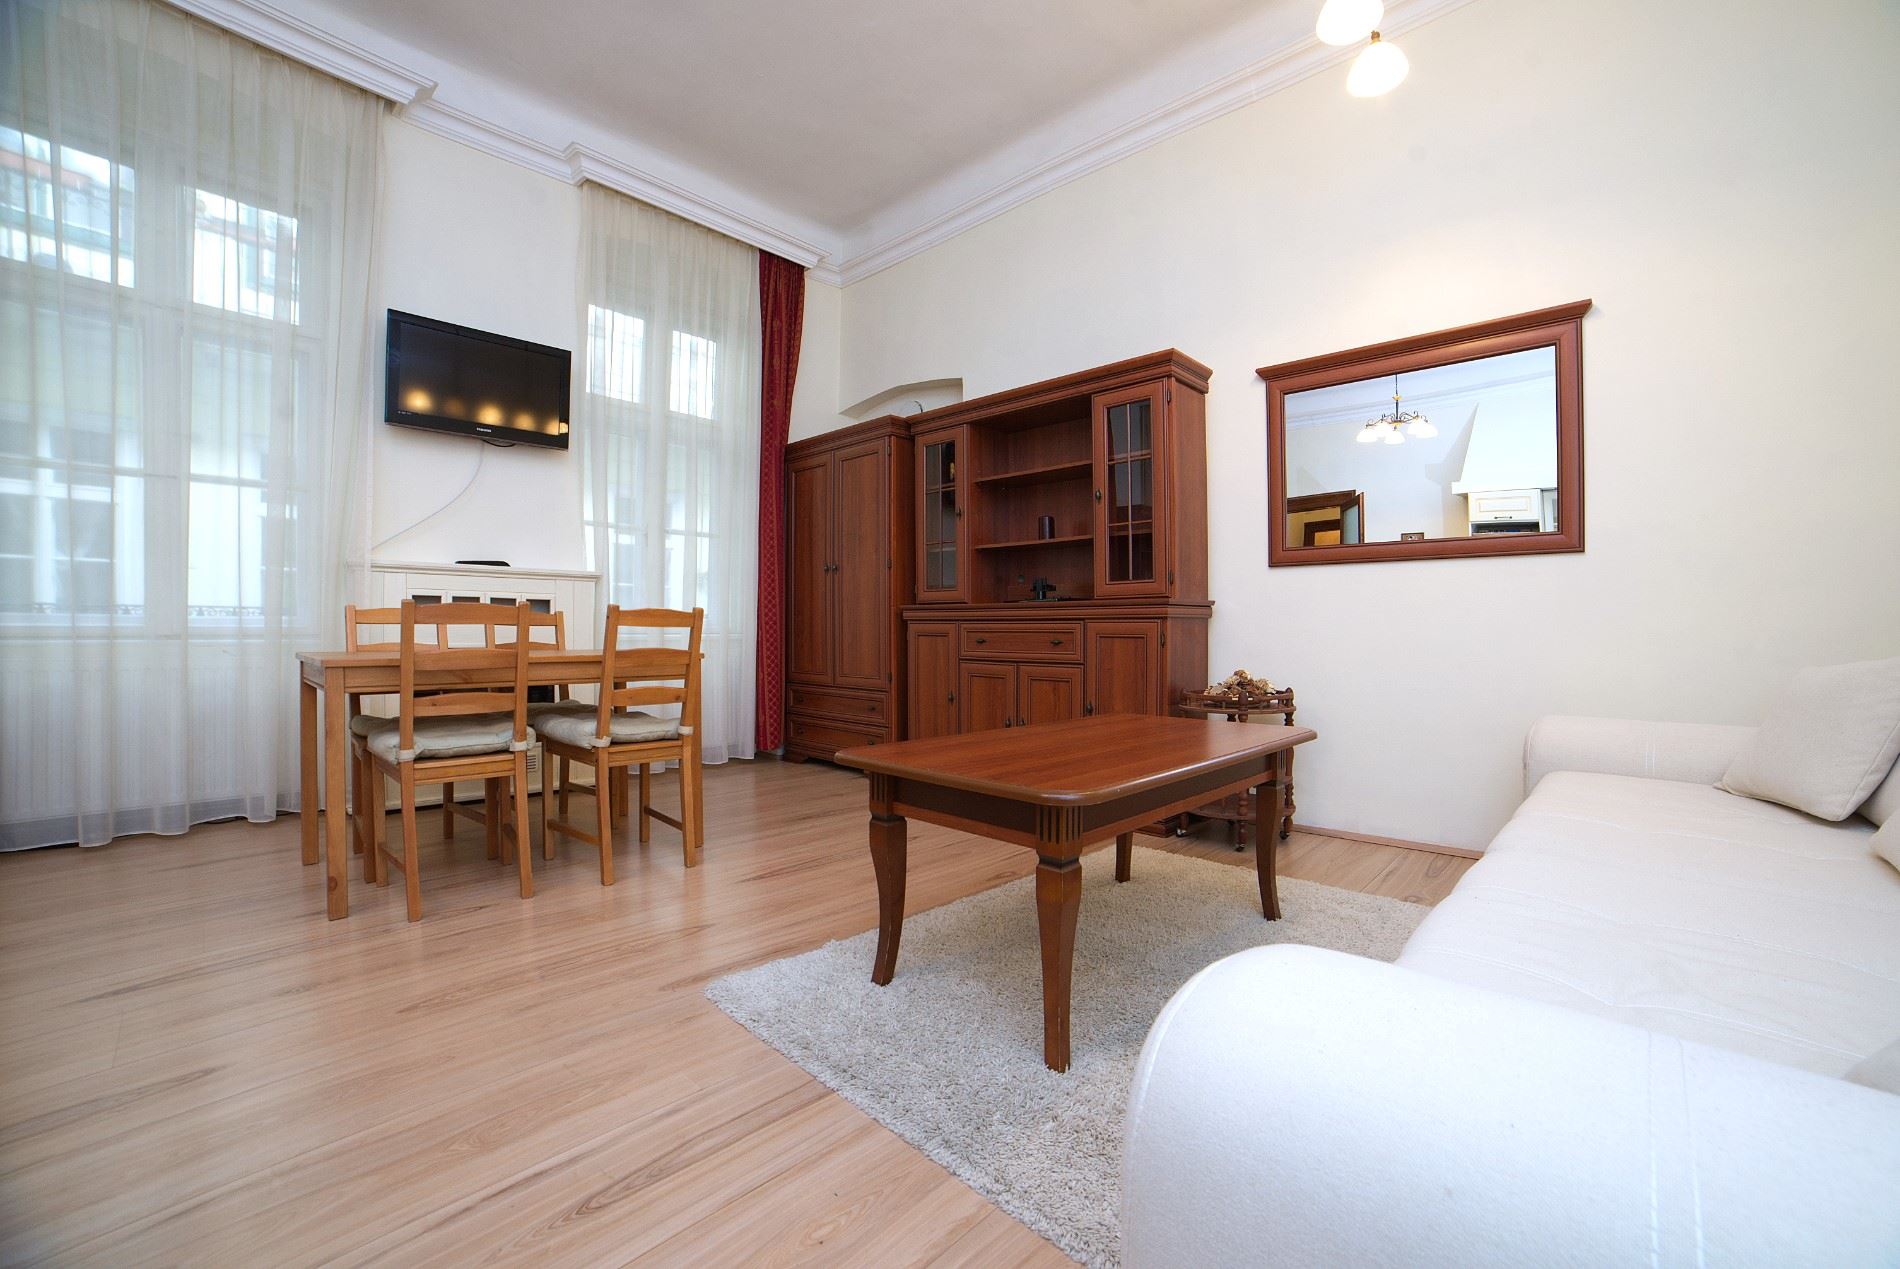 budapestrental-property-for-rent-long-term-spacious-large-1-bedroom-flat-for-rent-district-6-near-nyugati-main-tram2